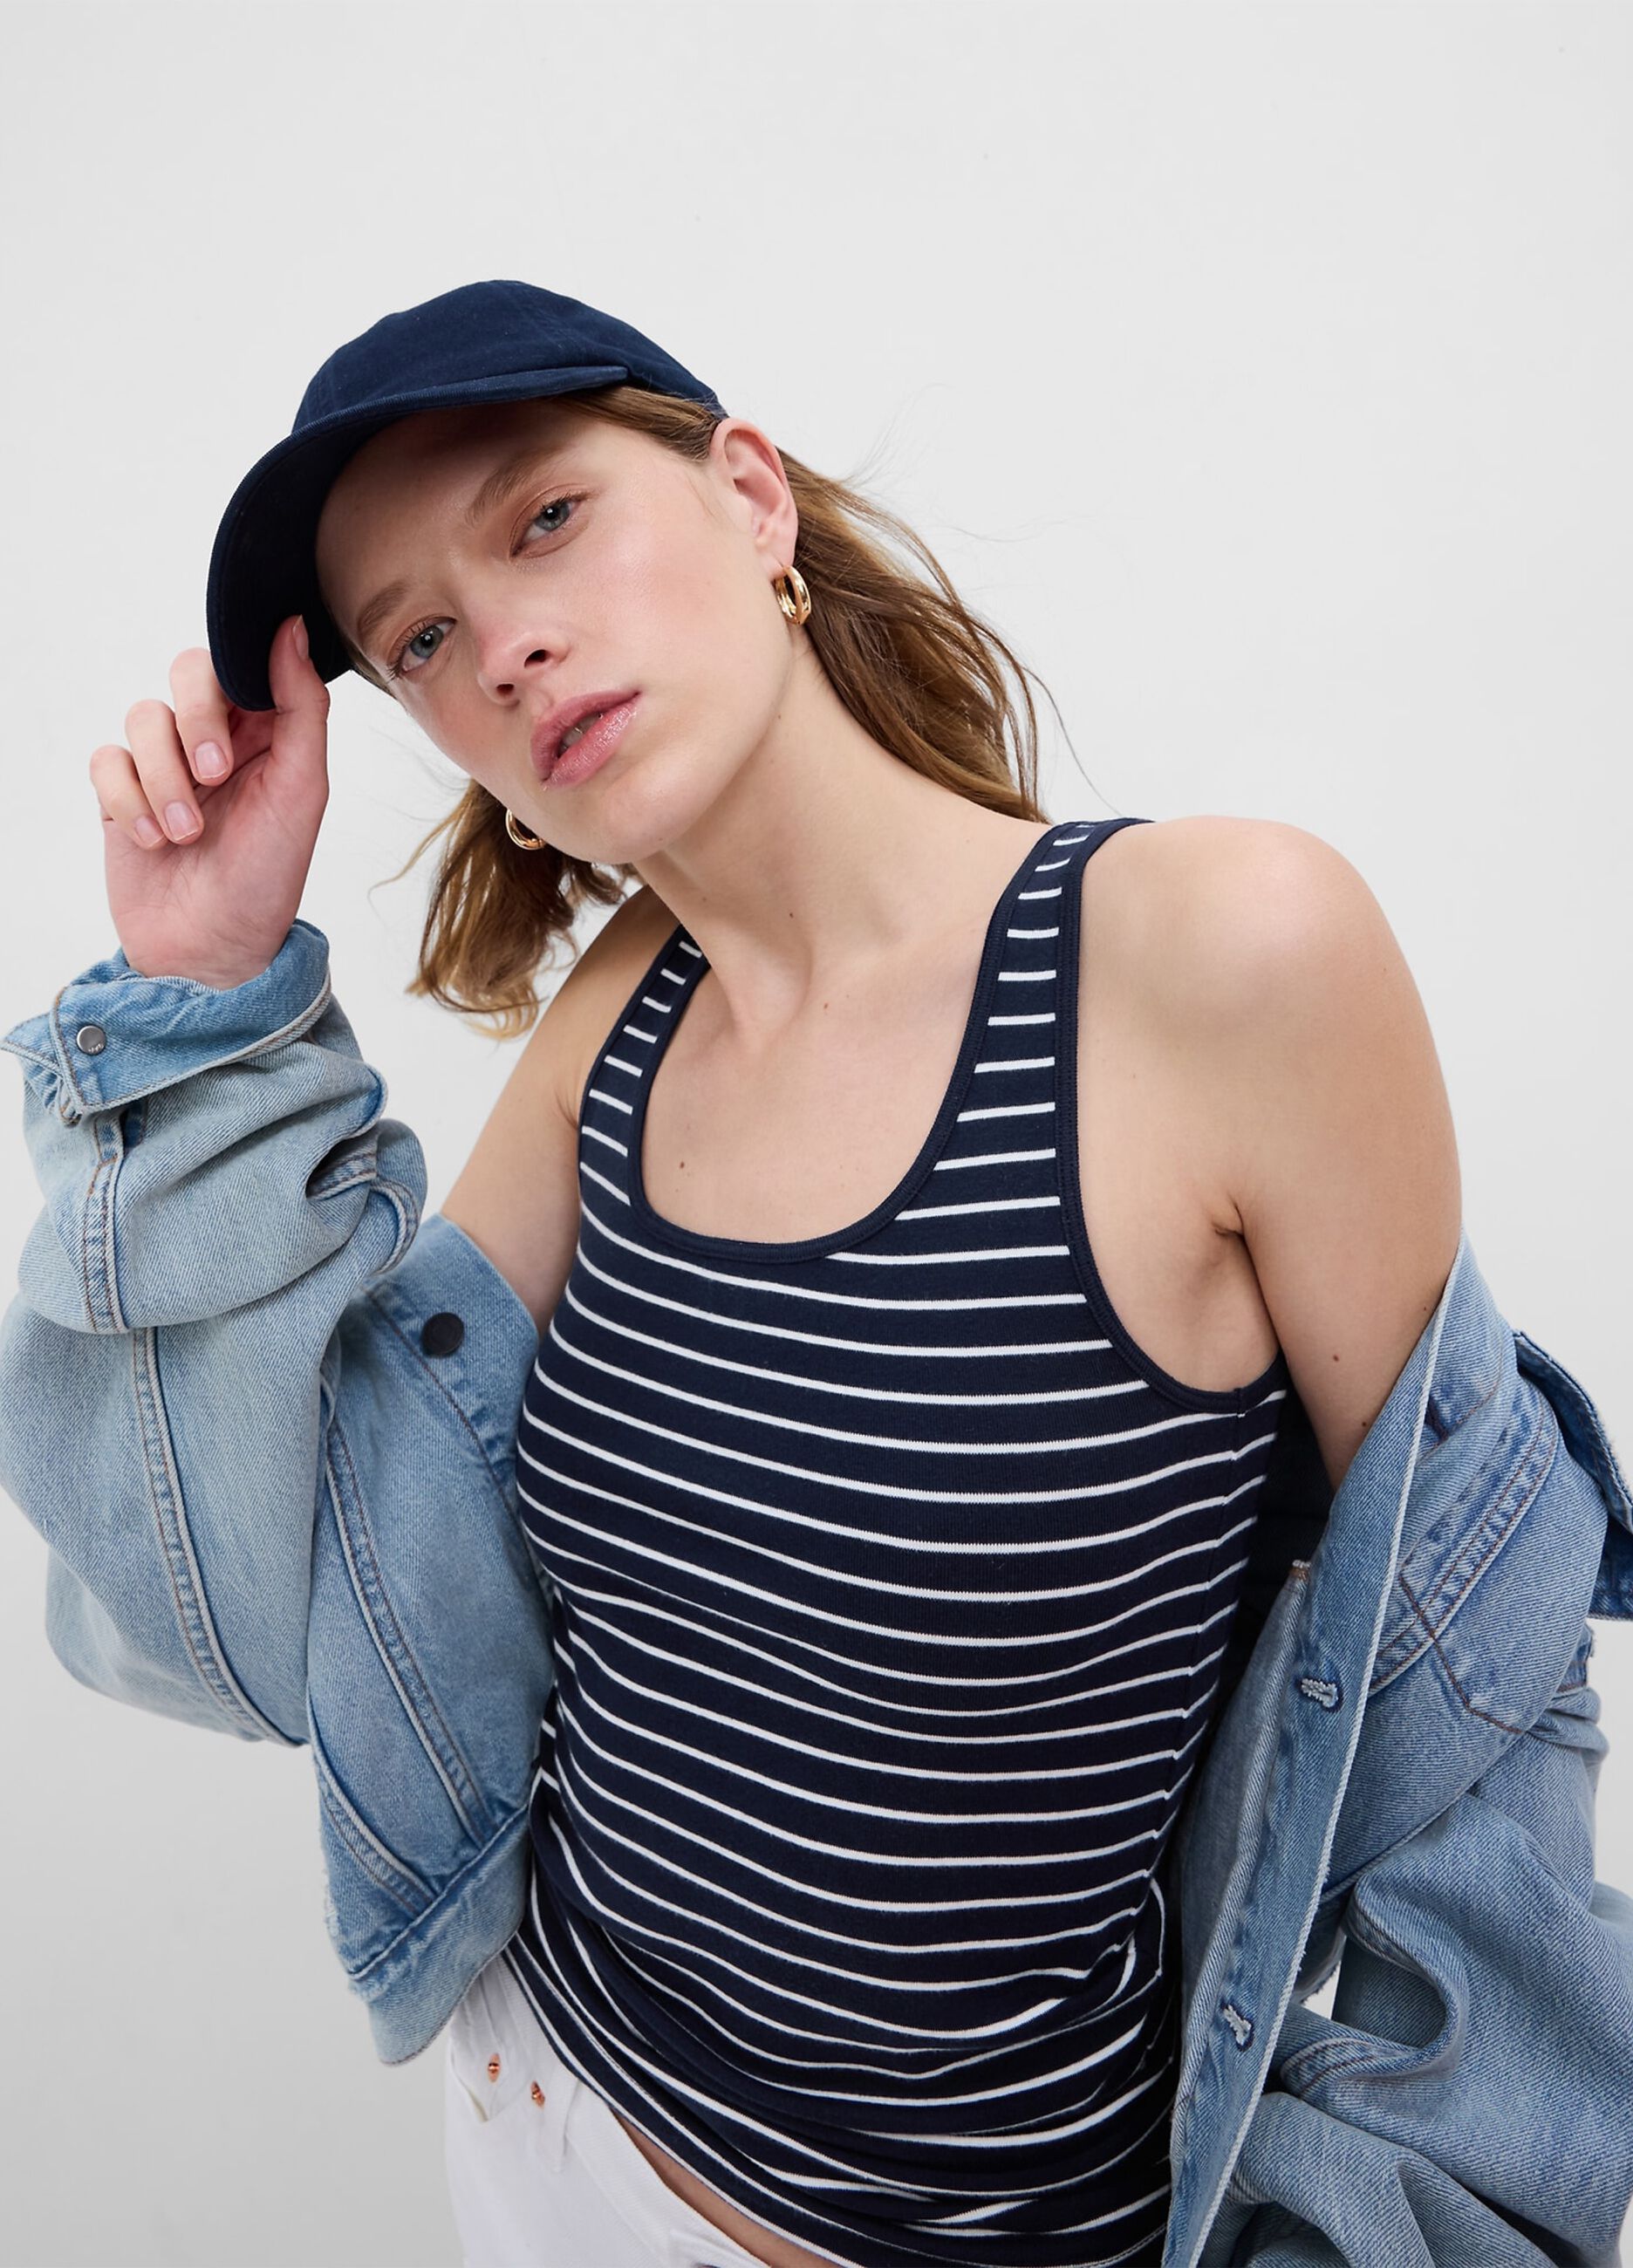 Stretch modal and cotton tank top with stripes